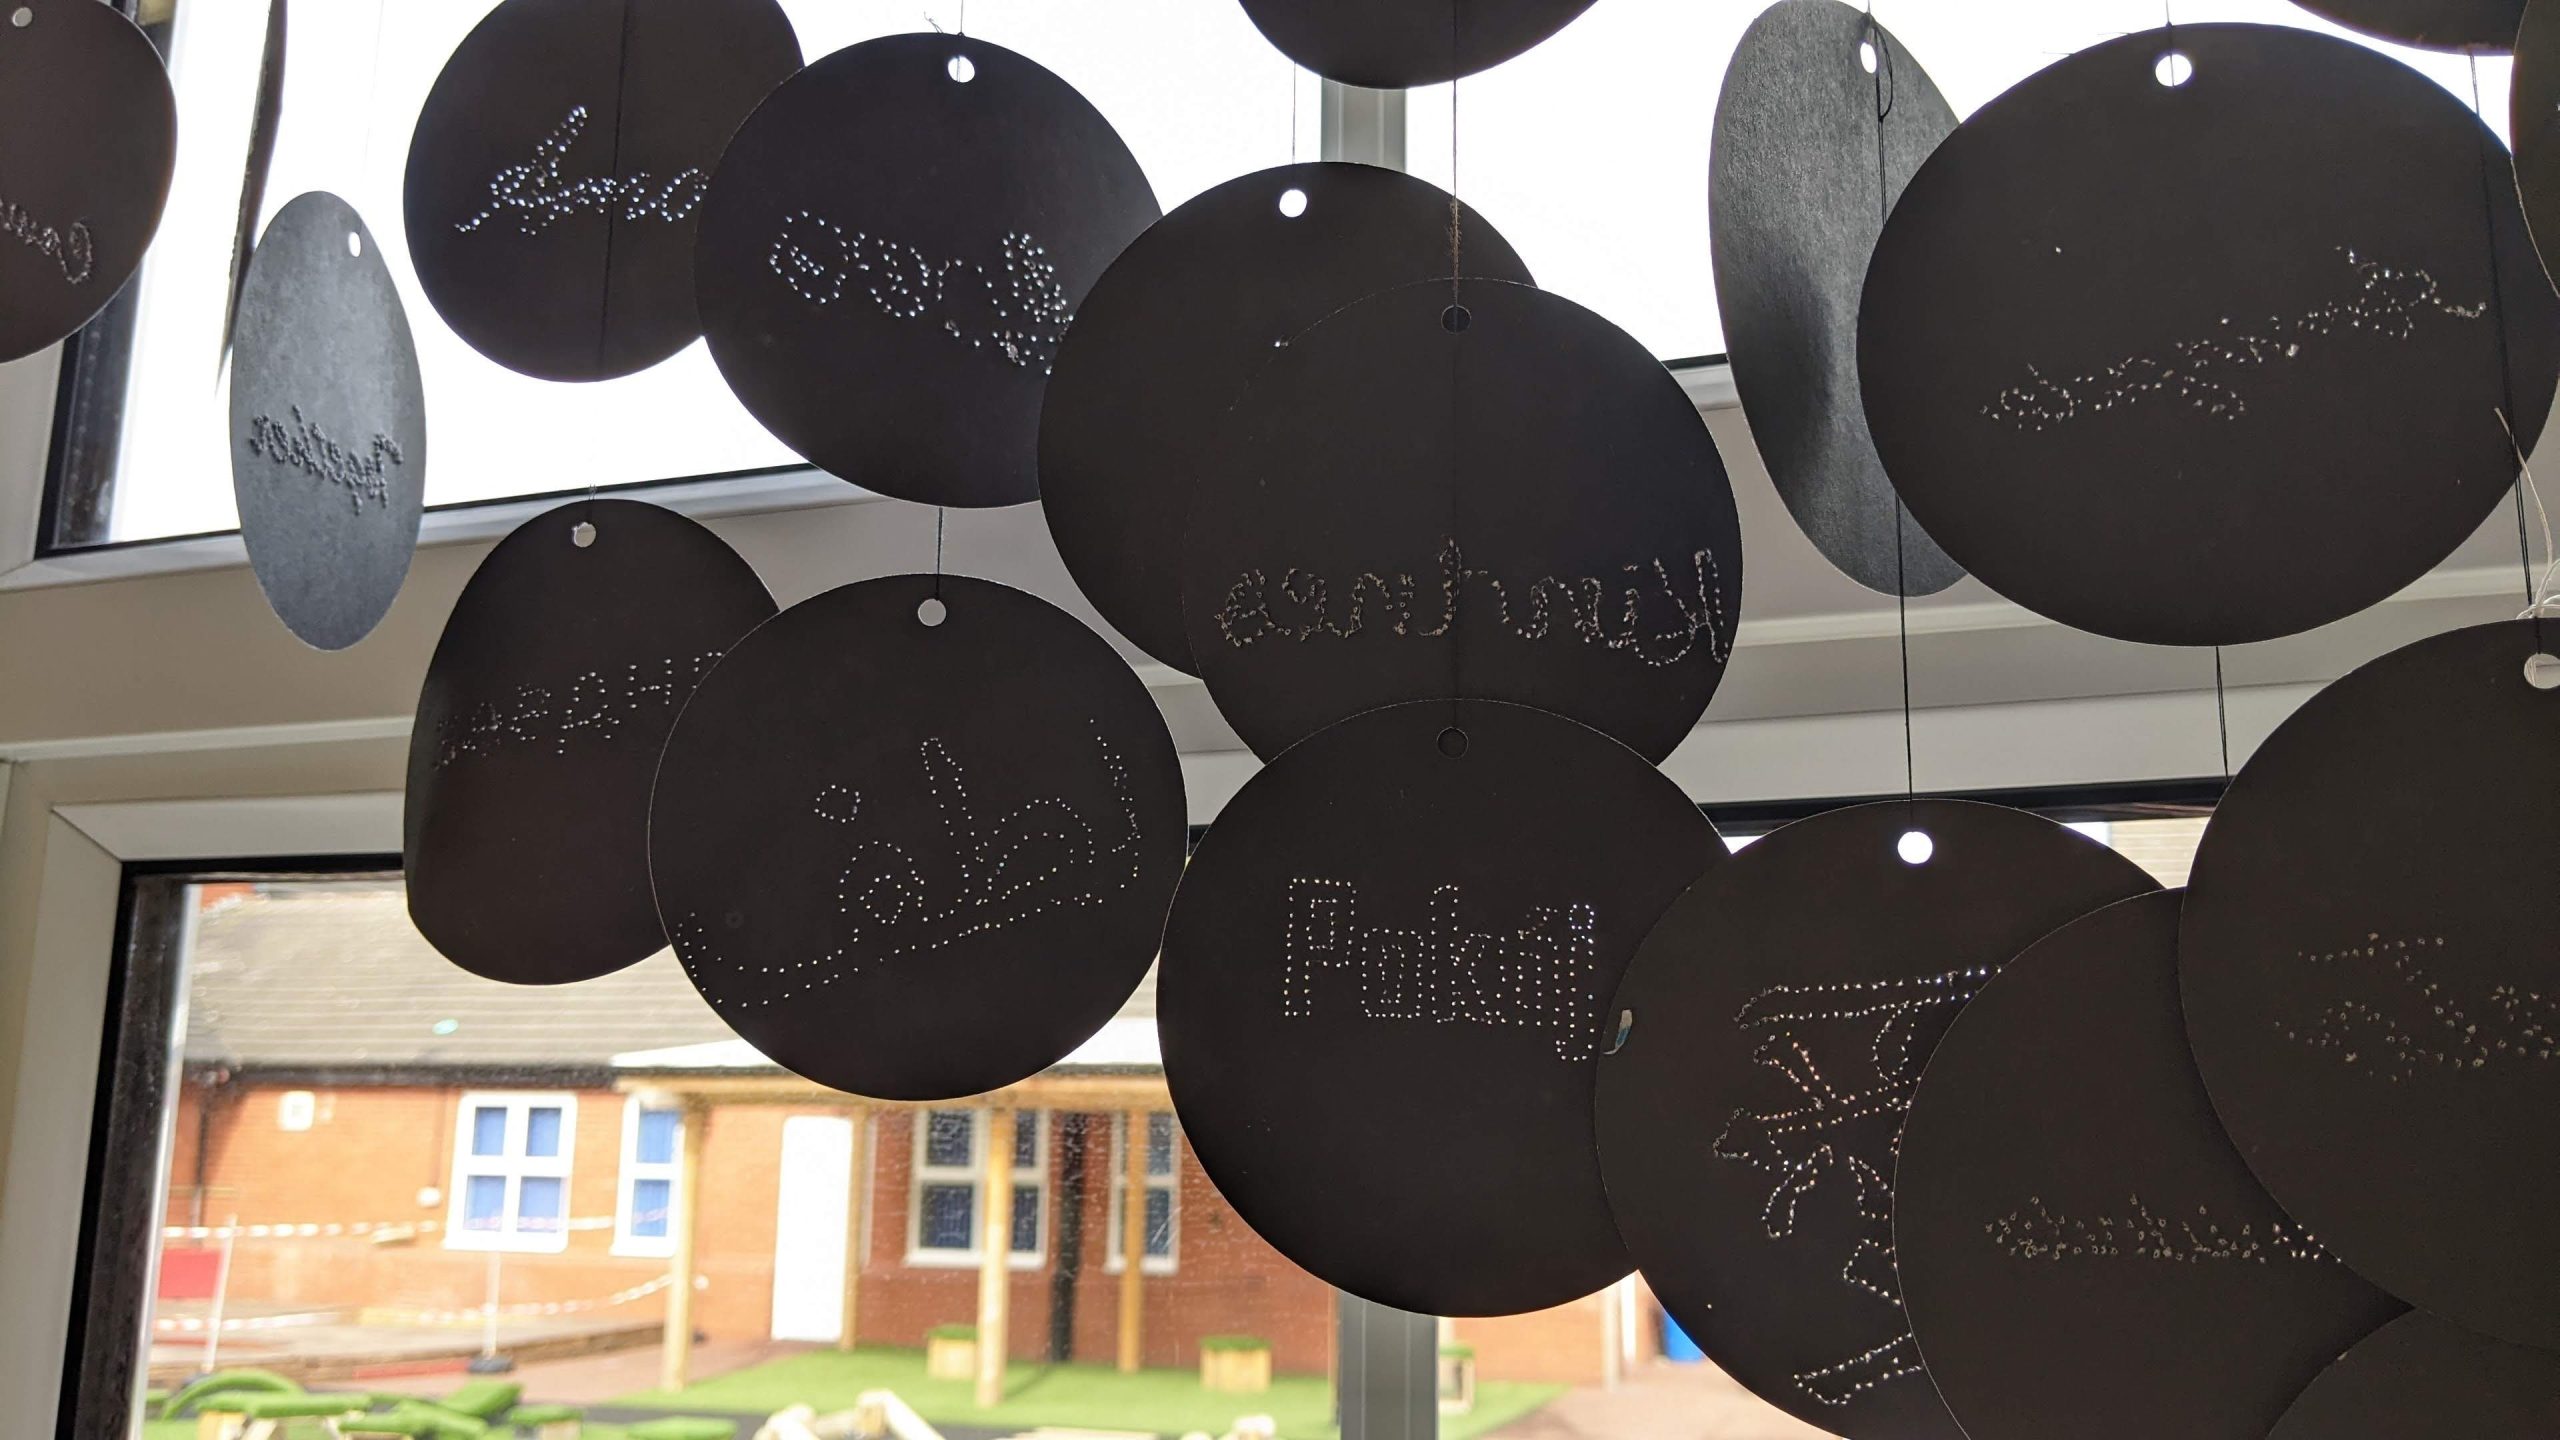 Black circles of card hang in front of a window. Words are written on each card  with tiny pin holes that form the letters. Fragments of words meaning peace, love, and kindness in english, polish, arabic, french and japanese can be seen.